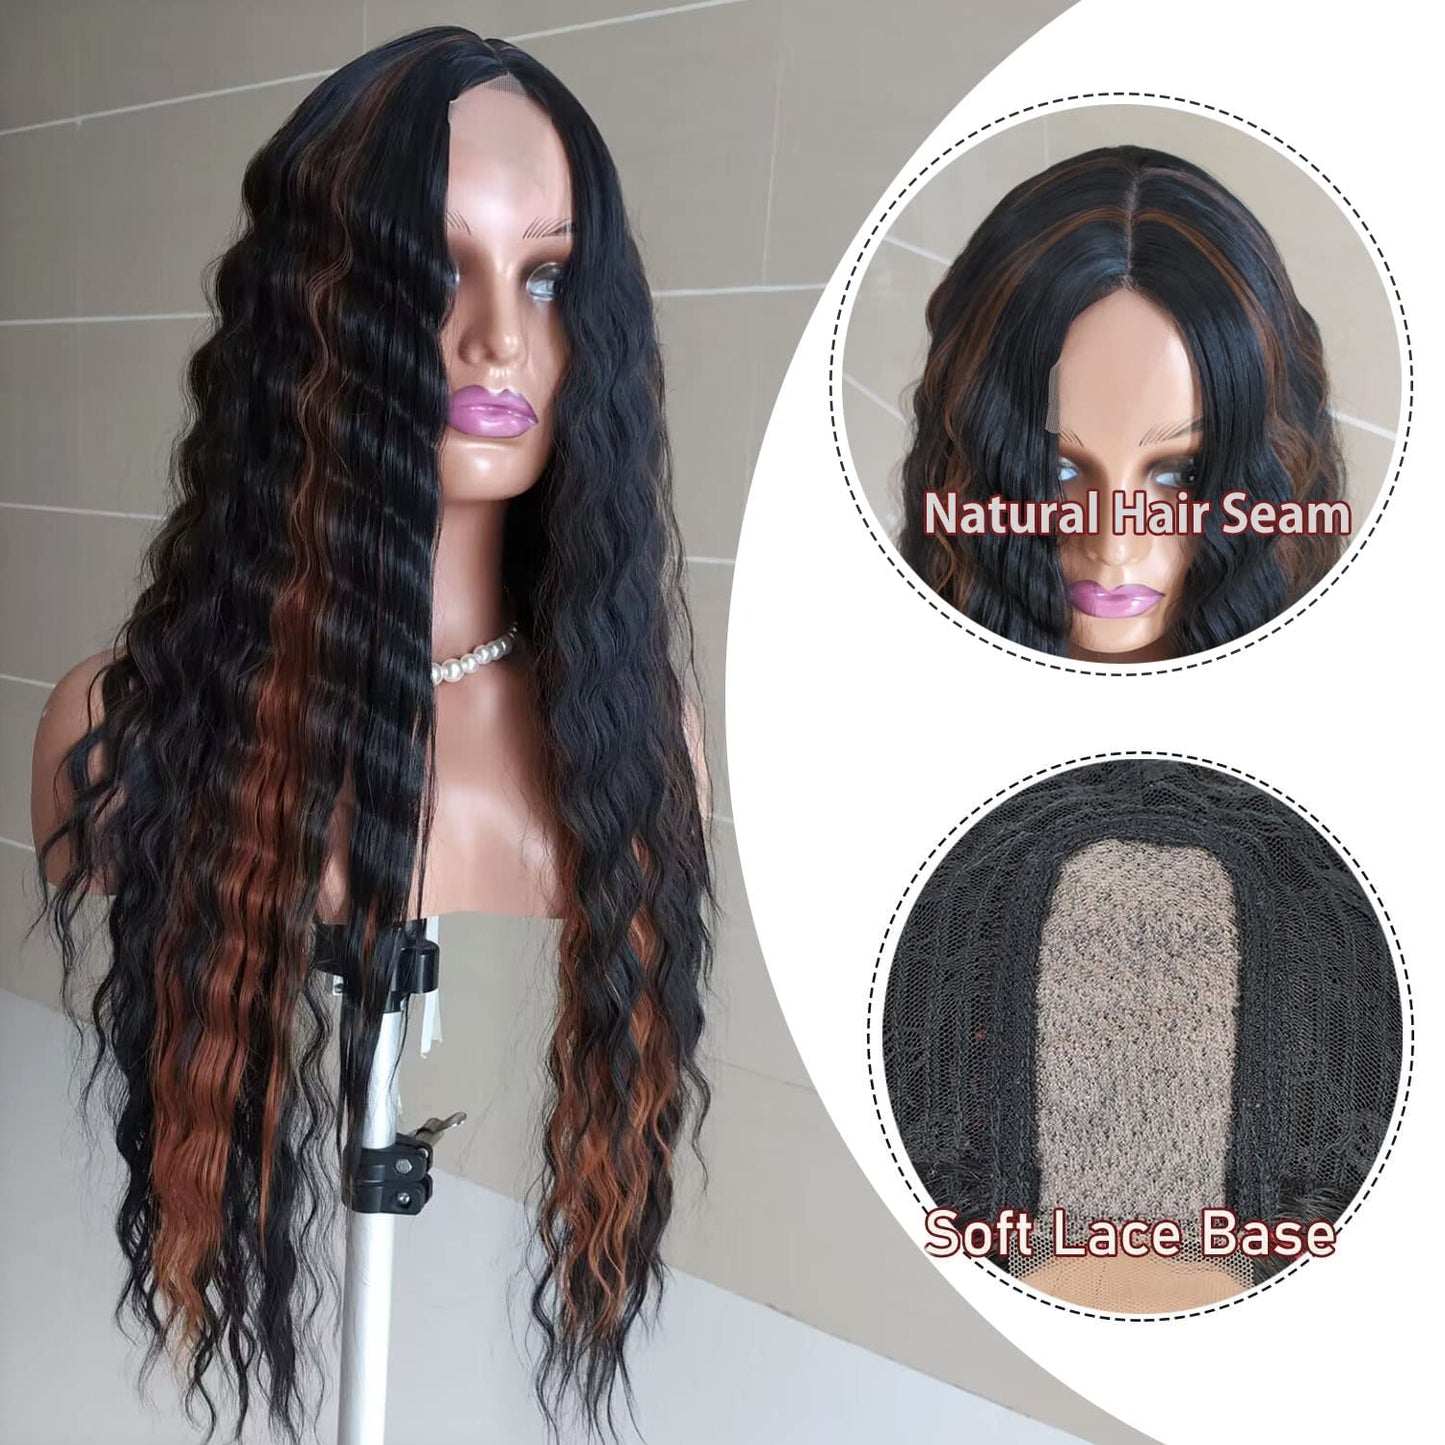 30 Inch Synthetic Curly Wigs for Women Long Black Hair Wig Lace Front 4" Simulated Scalp Natural Loose Deep Wave Crimps Curls Wig As Hair Replacement Wigs 1B